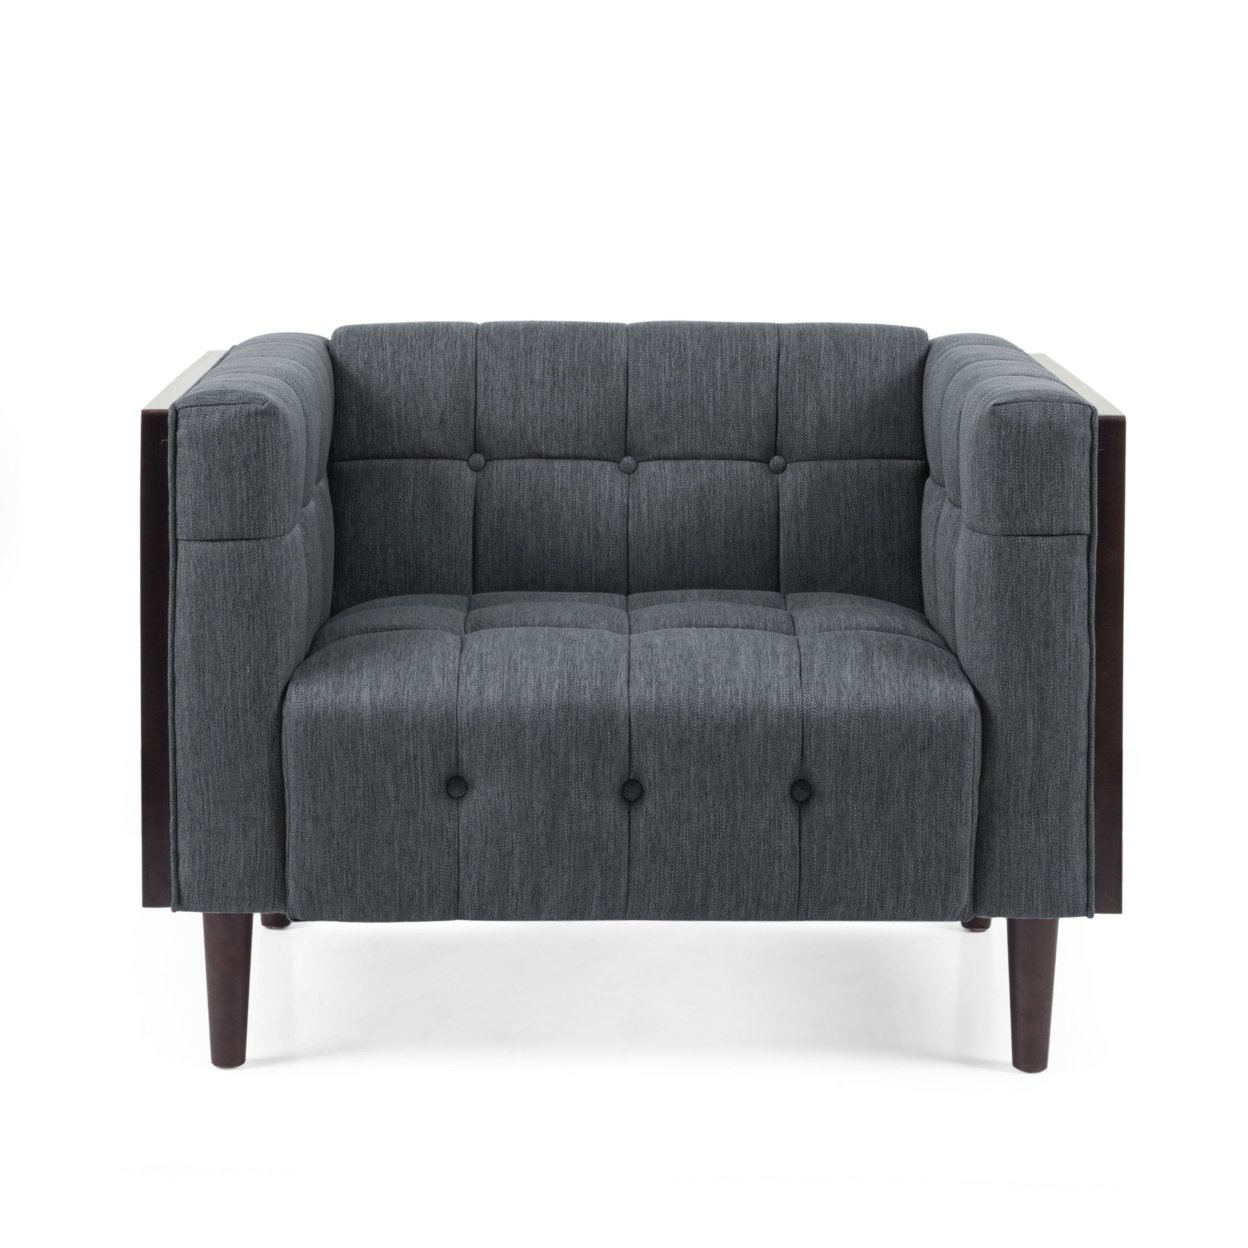 Croton Contemporary Tufted Club Chair - Brown/charcoal